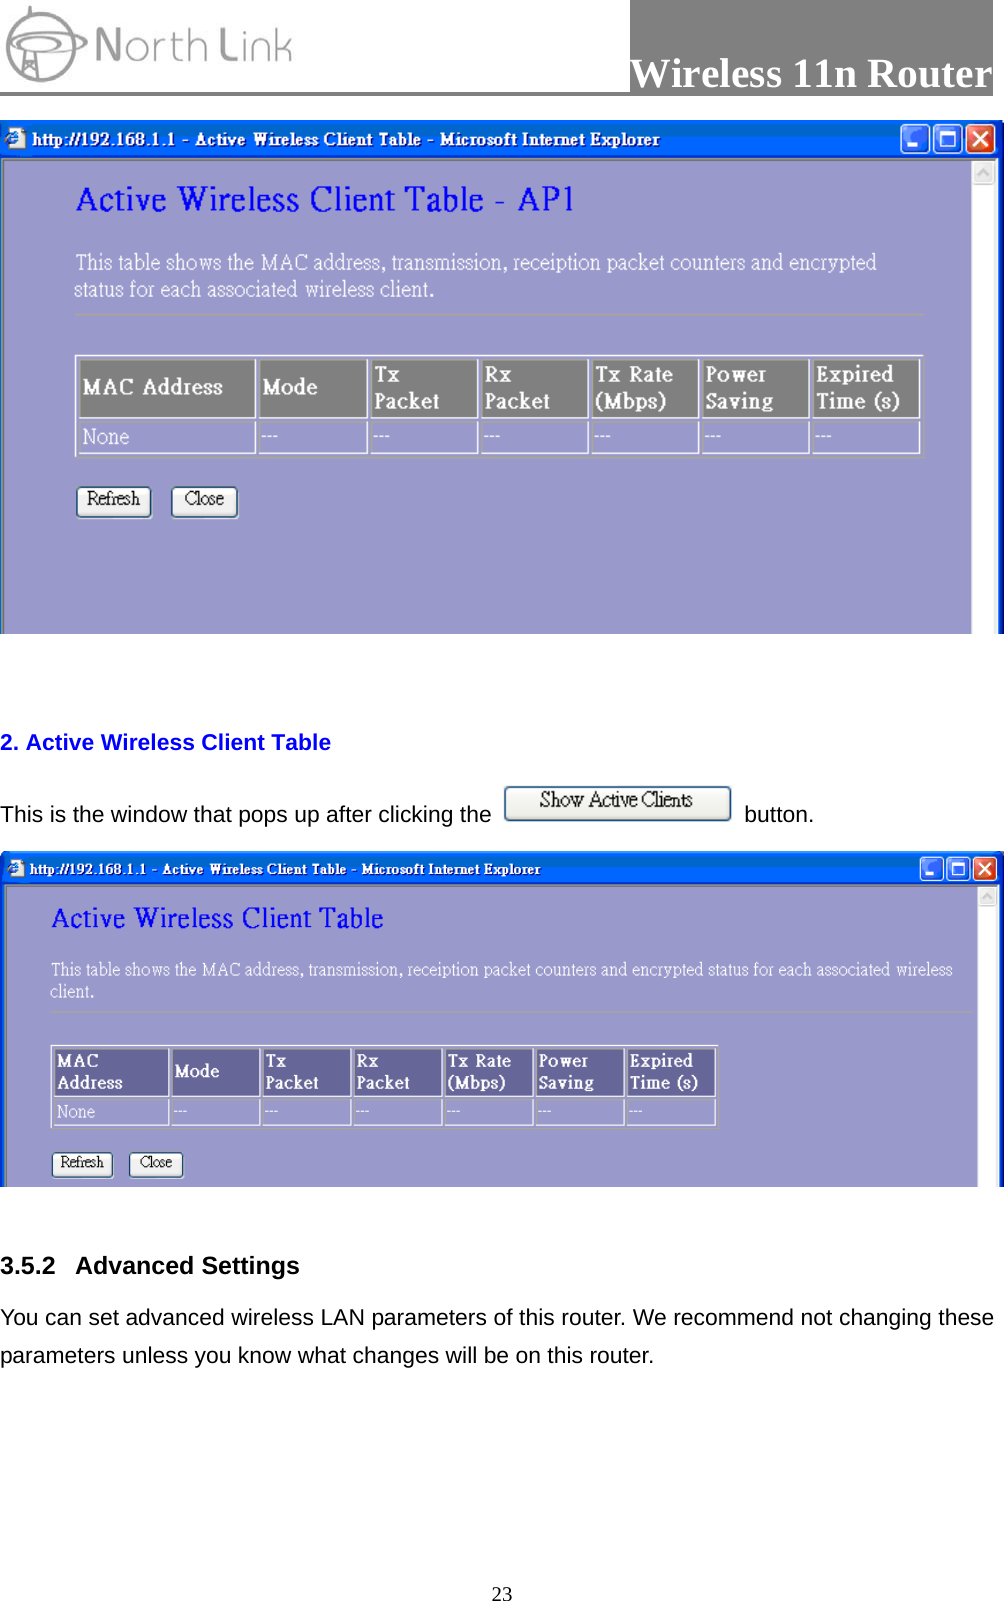                 Wireless 11n Router   23  2. Active Wireless Client Table   This is the window that pops up after clicking the   button.   3.5.2 Advanced Settings You can set advanced wireless LAN parameters of this router. We recommend not changing these parameters unless you know what changes will be on this router. 